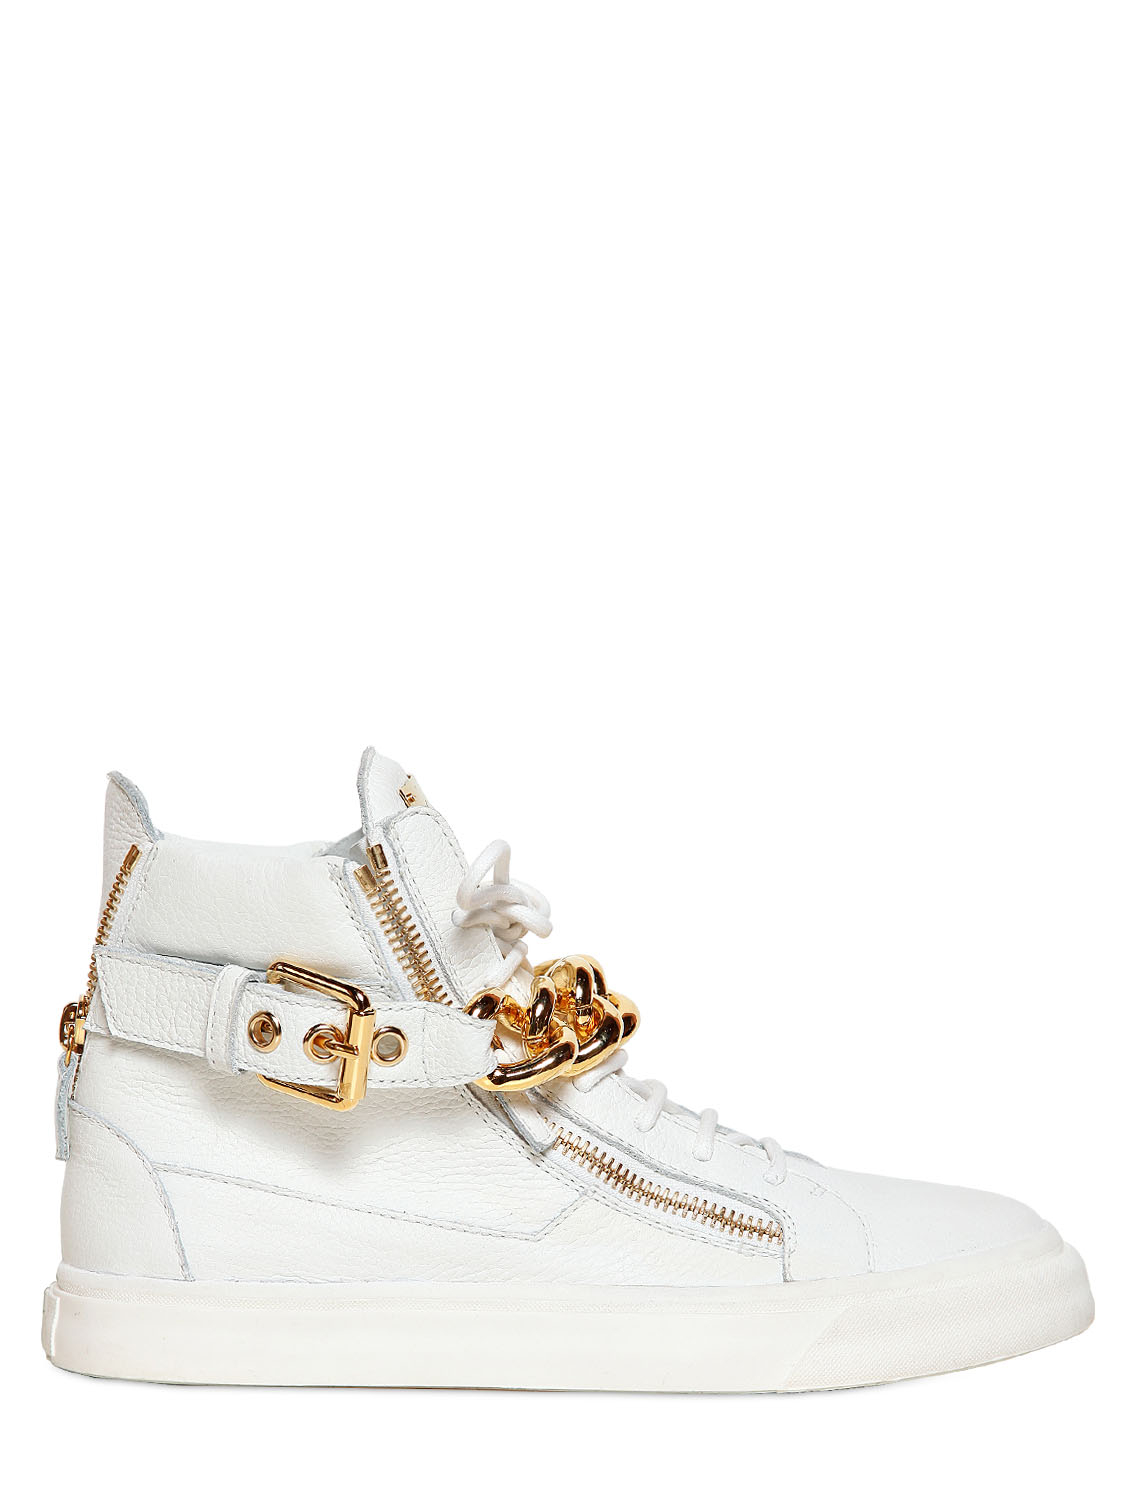 Lyst - Giuseppe Zanotti Metal Chain Leather High Top Sneakers in White ...